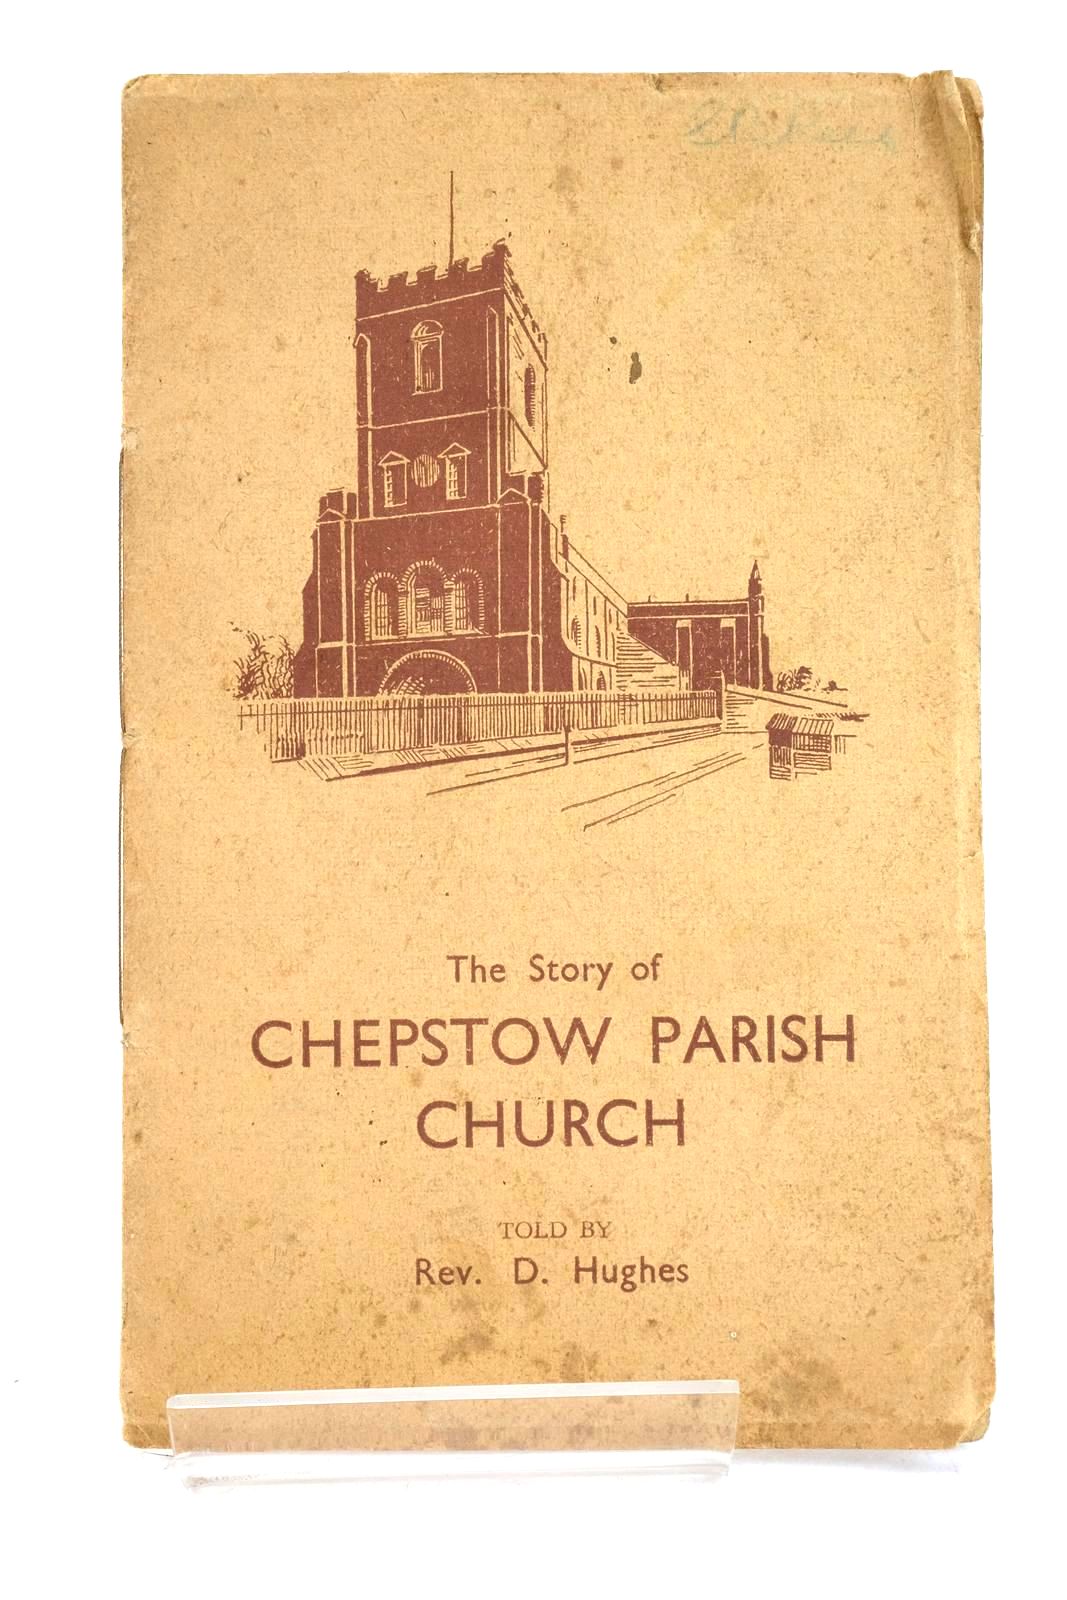 Photo of THE STORY OF CHEPSTOW PARISH CHURCH written by Hughes, Rev. D. published by The British Publishing Company (STOCK CODE: 1327830)  for sale by Stella & Rose's Books